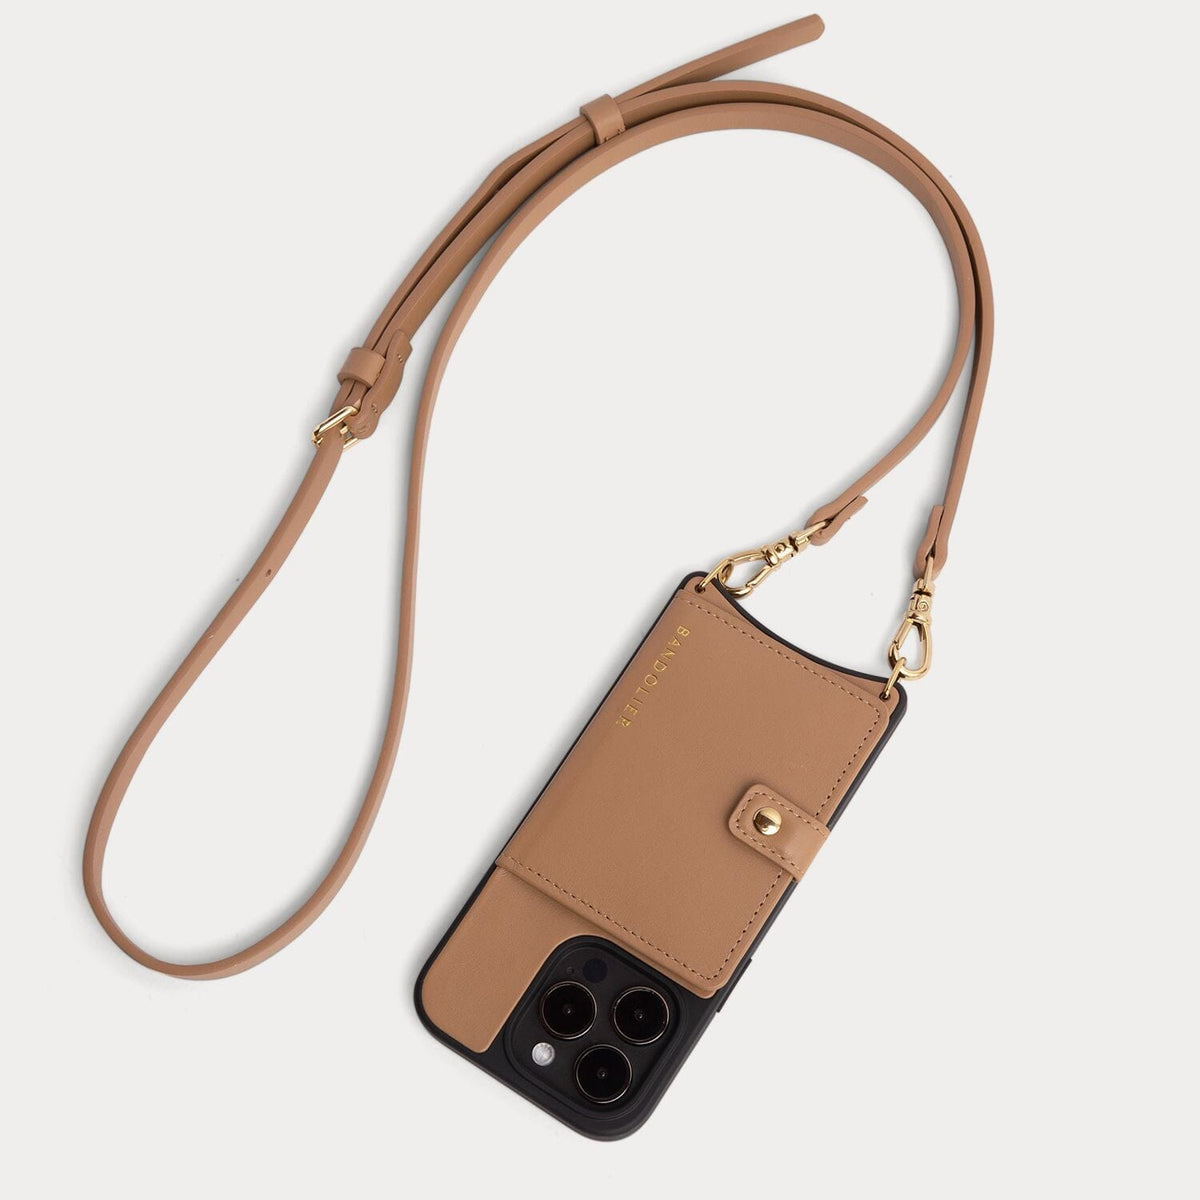 Bandolier's Crossbody Wallet Phone Case Is a Must-Have